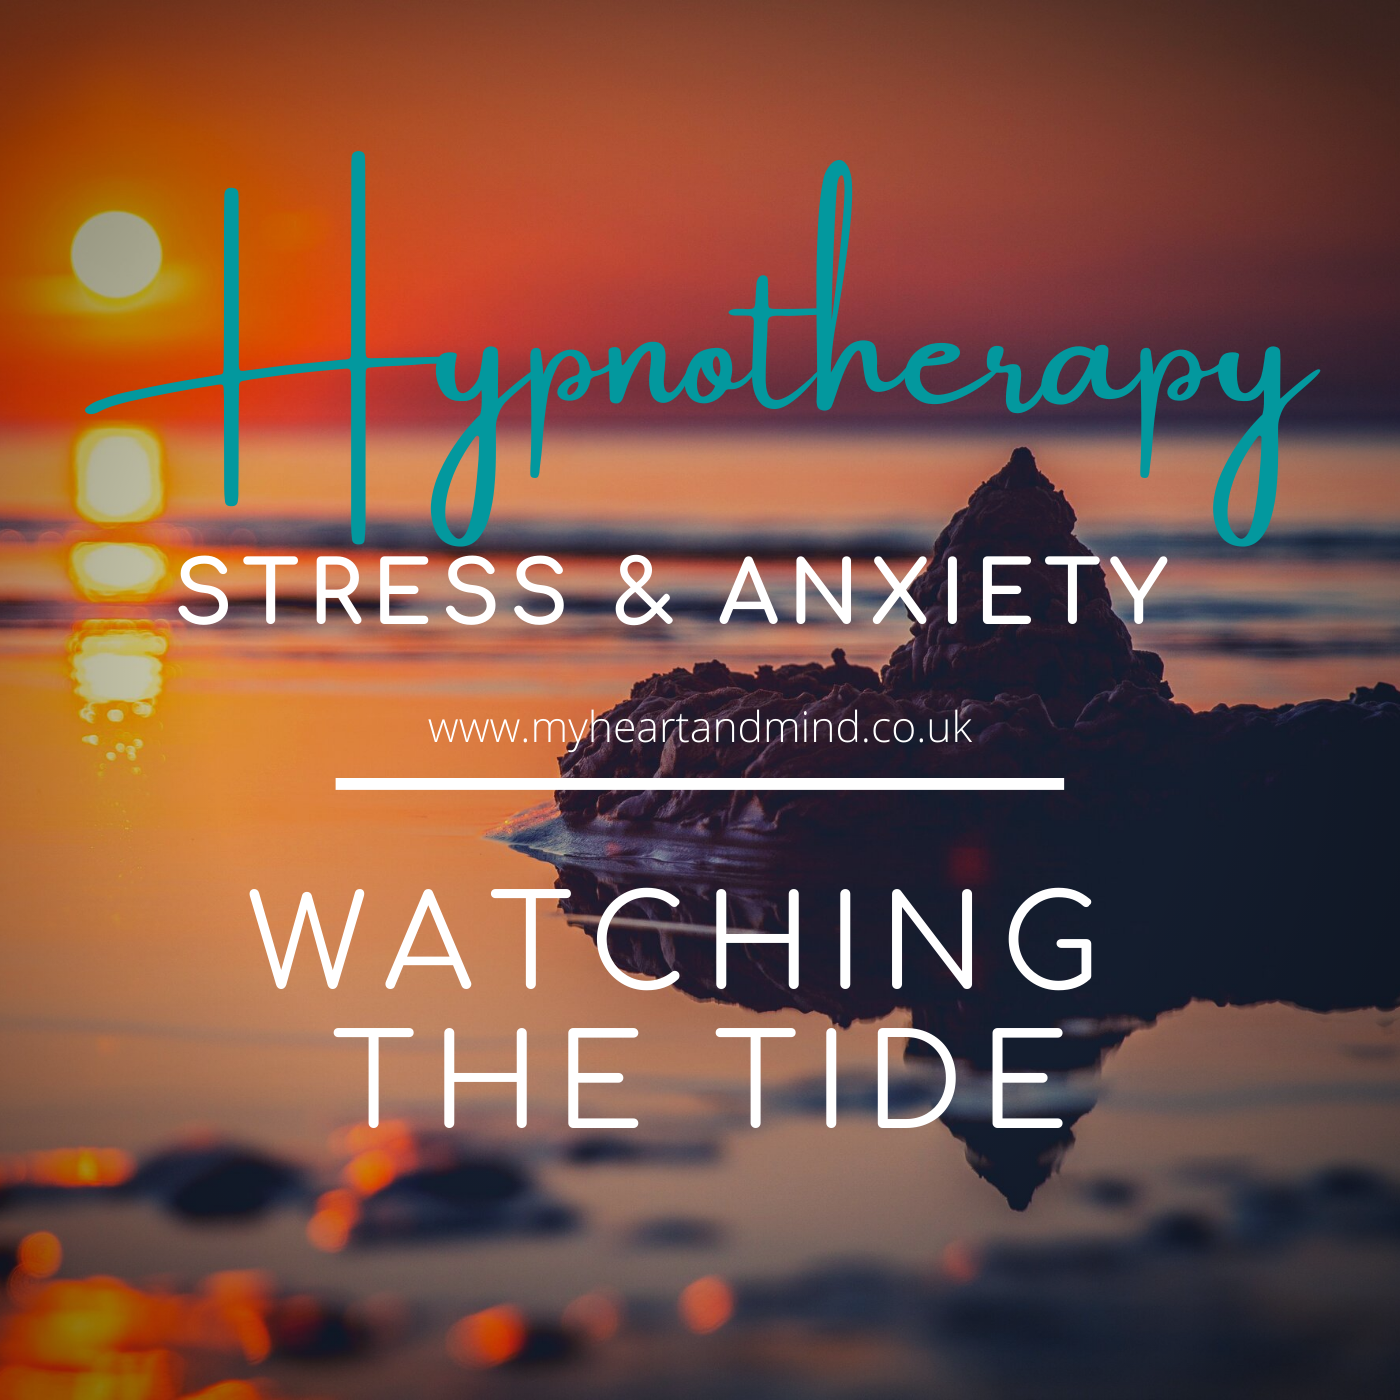 Stress & Anxiety Hypnotherapy - Watching The Tide